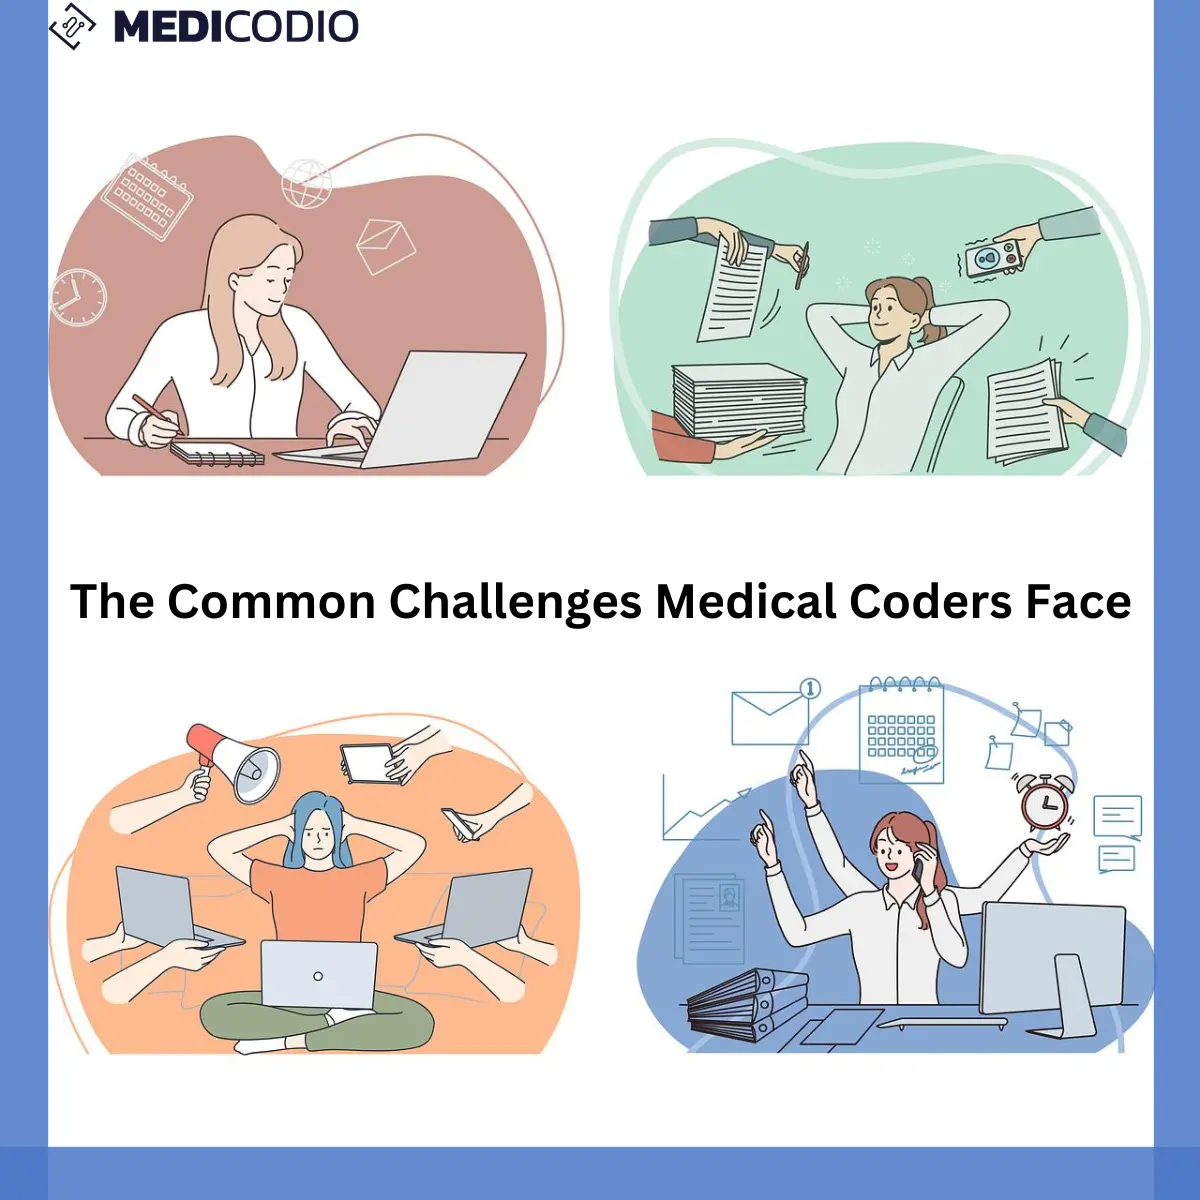 The Common Challenges Medical Coders Face